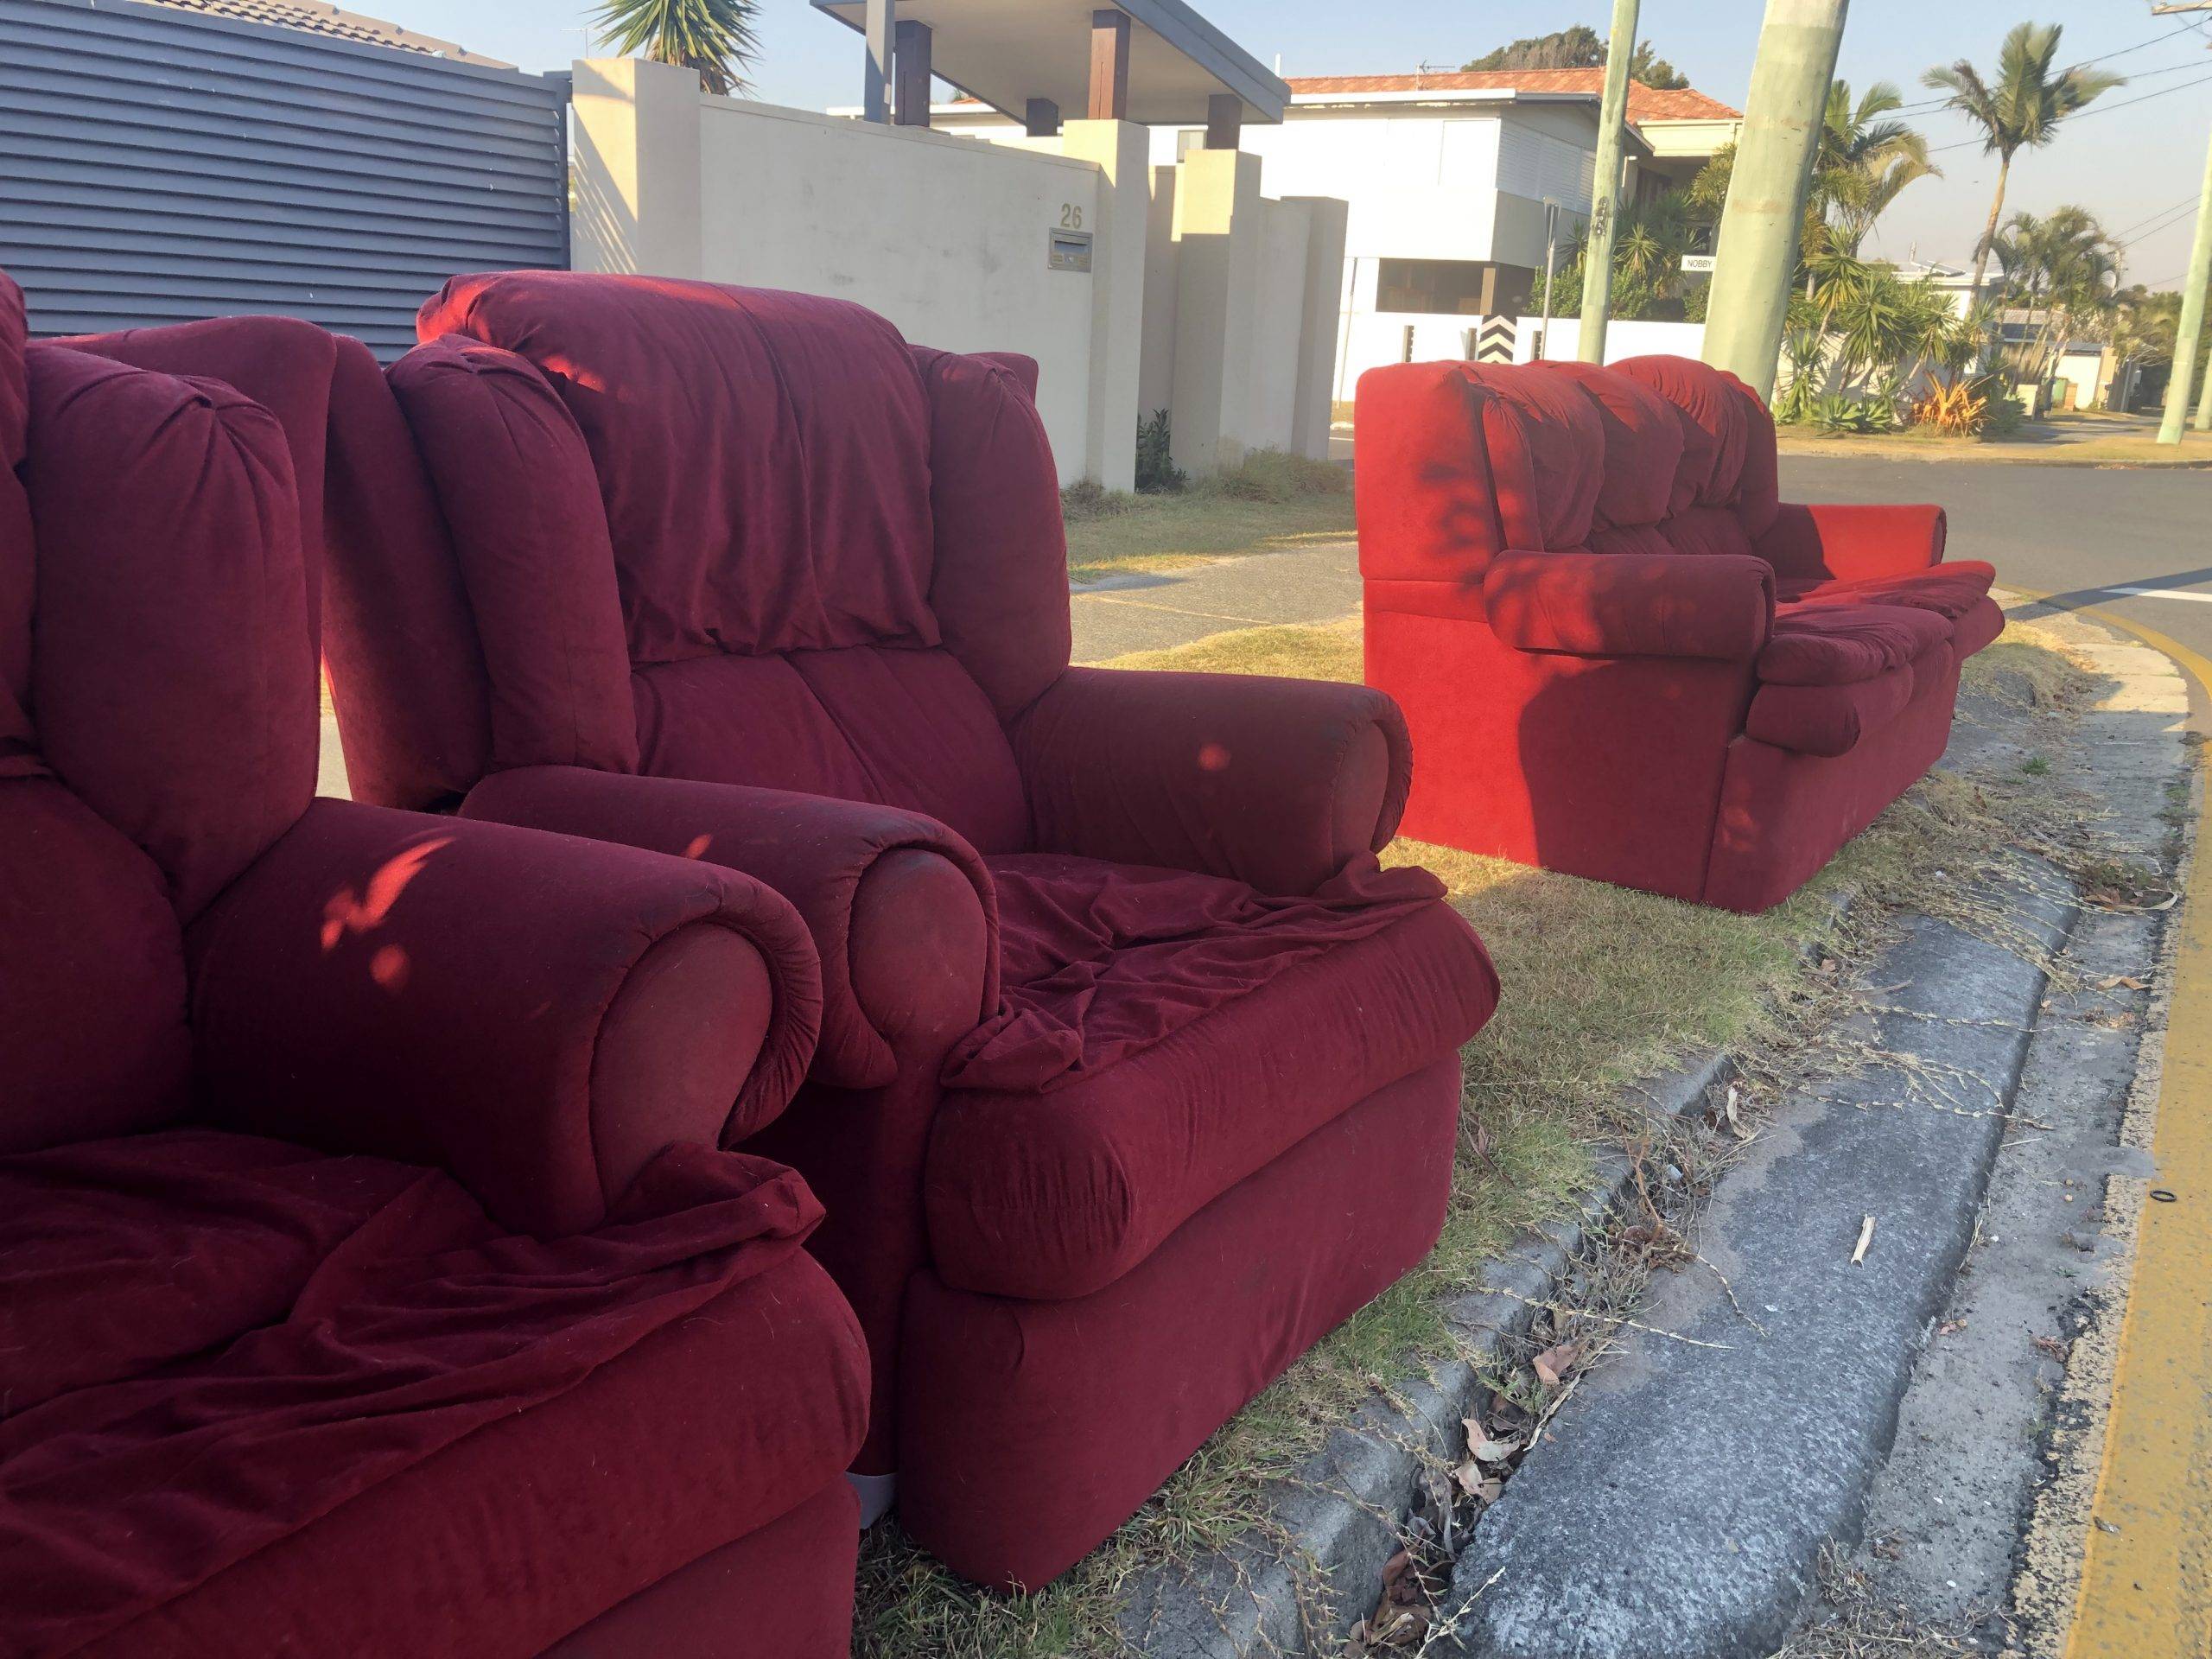 For Affordable Furniture Disposal In Brisbane, Call 4 Waste!